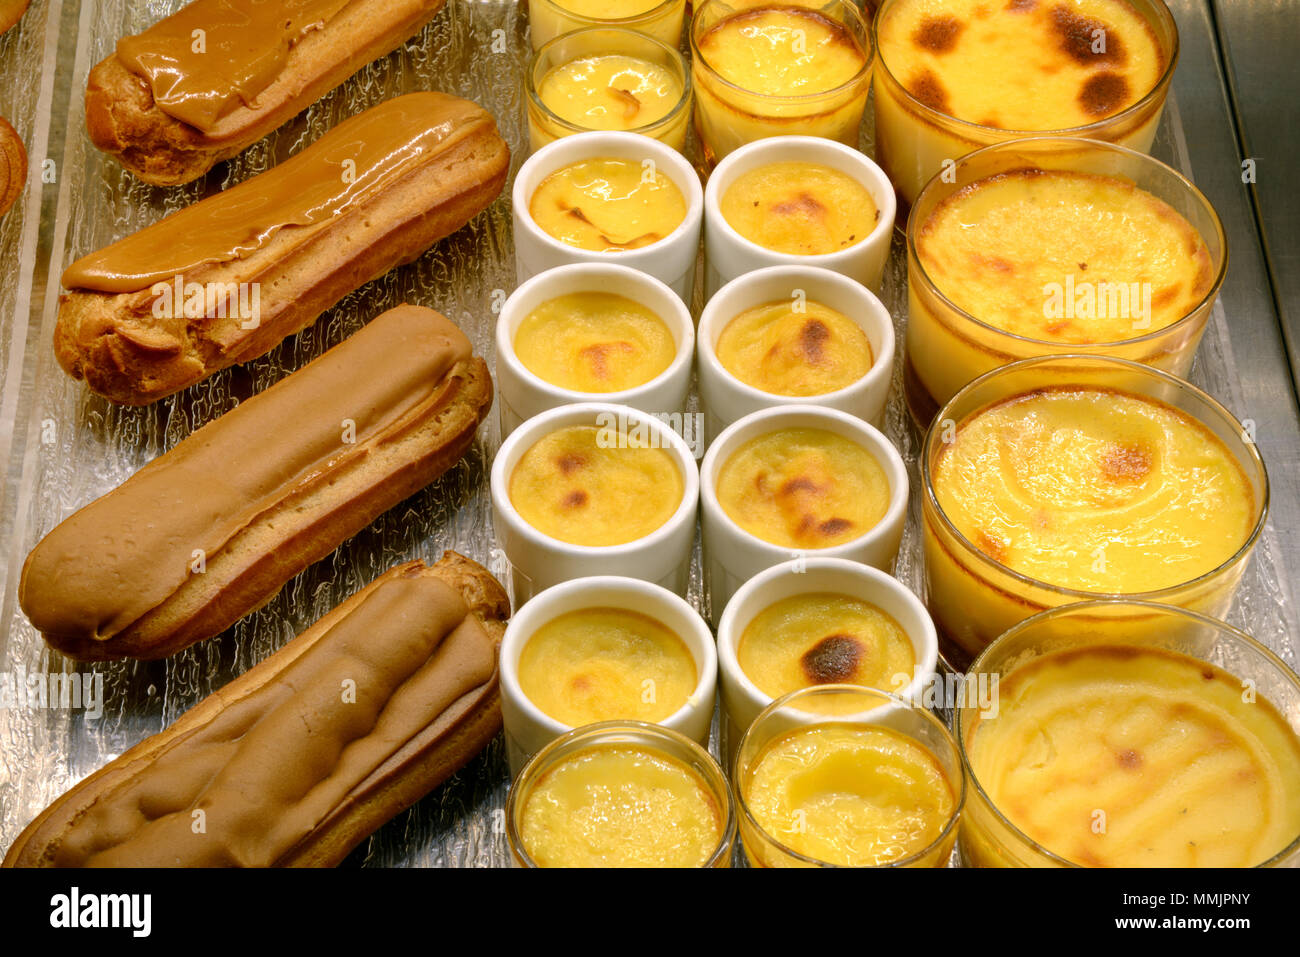 Display of Crèmes Caramels & Coffee Eclairs Pastries or Cakes in a French Patisserie France Stock Photo